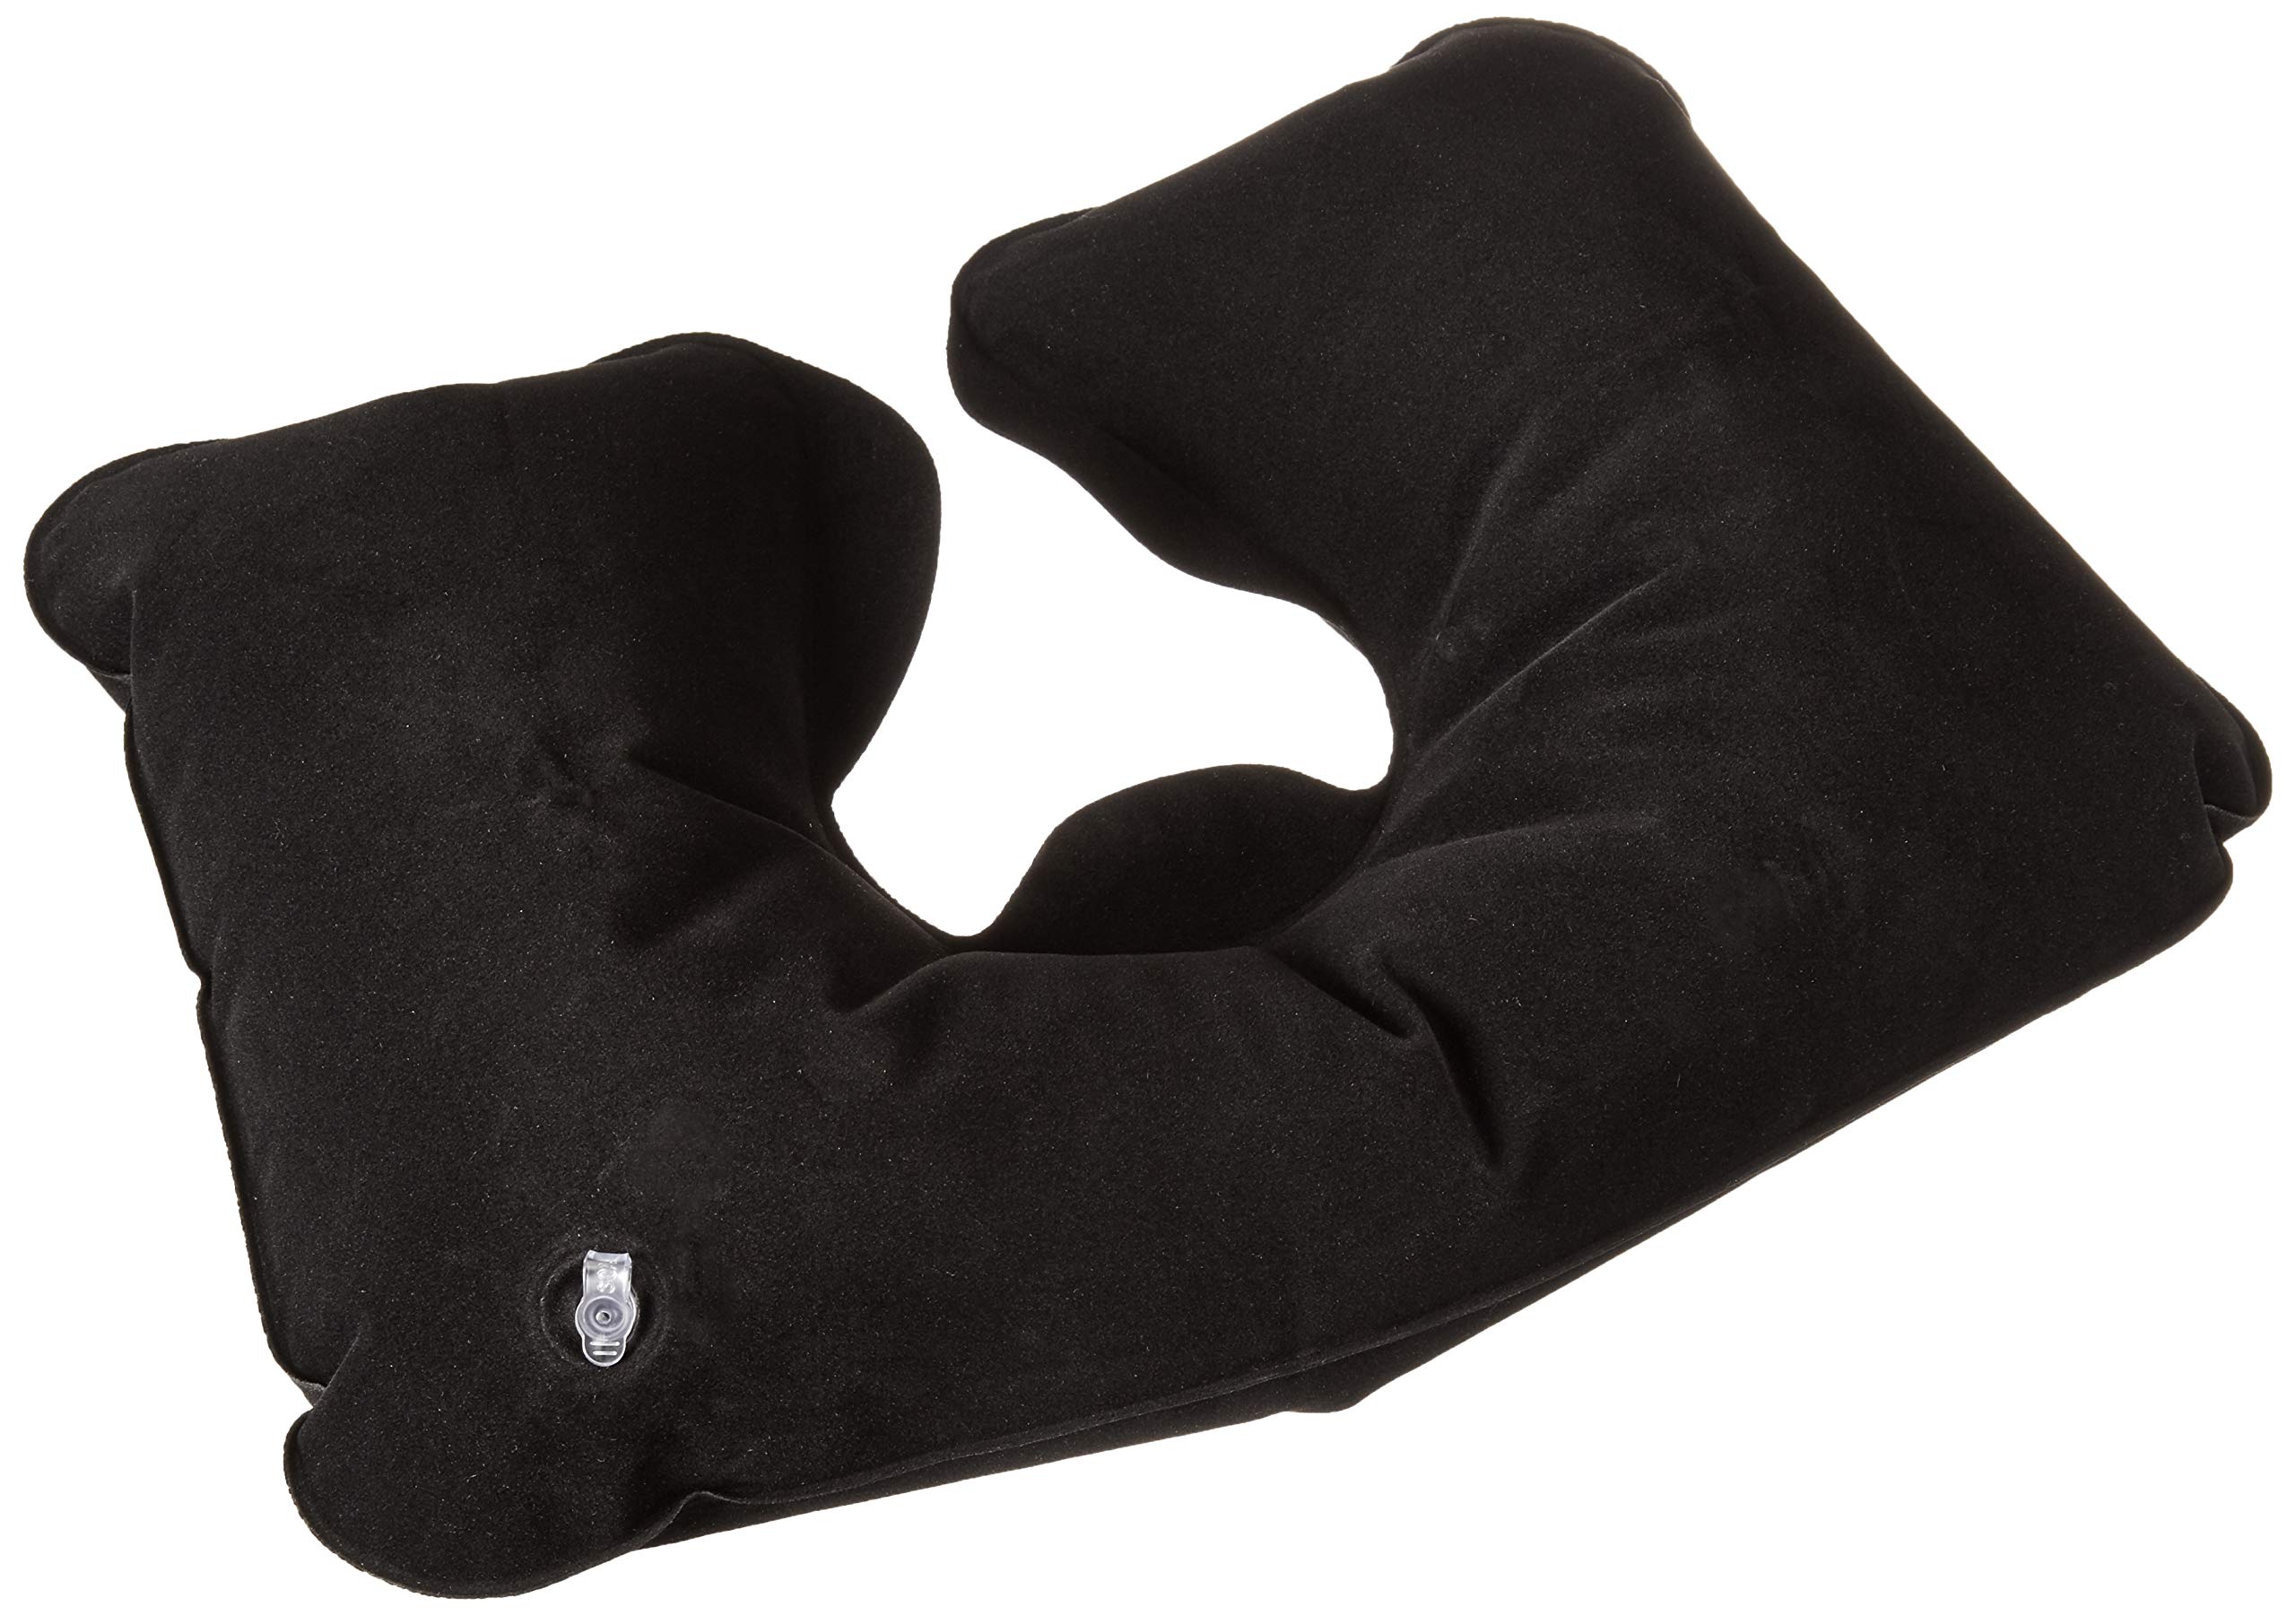 Lewis N. Clark Original Neckrest Inflatable Pillow, Waterproof Neck Pillow for Neck Support at the Beach, Pool + Airport Travel with Fully Adjustable Firmness and Included Carrying Pouch, Black